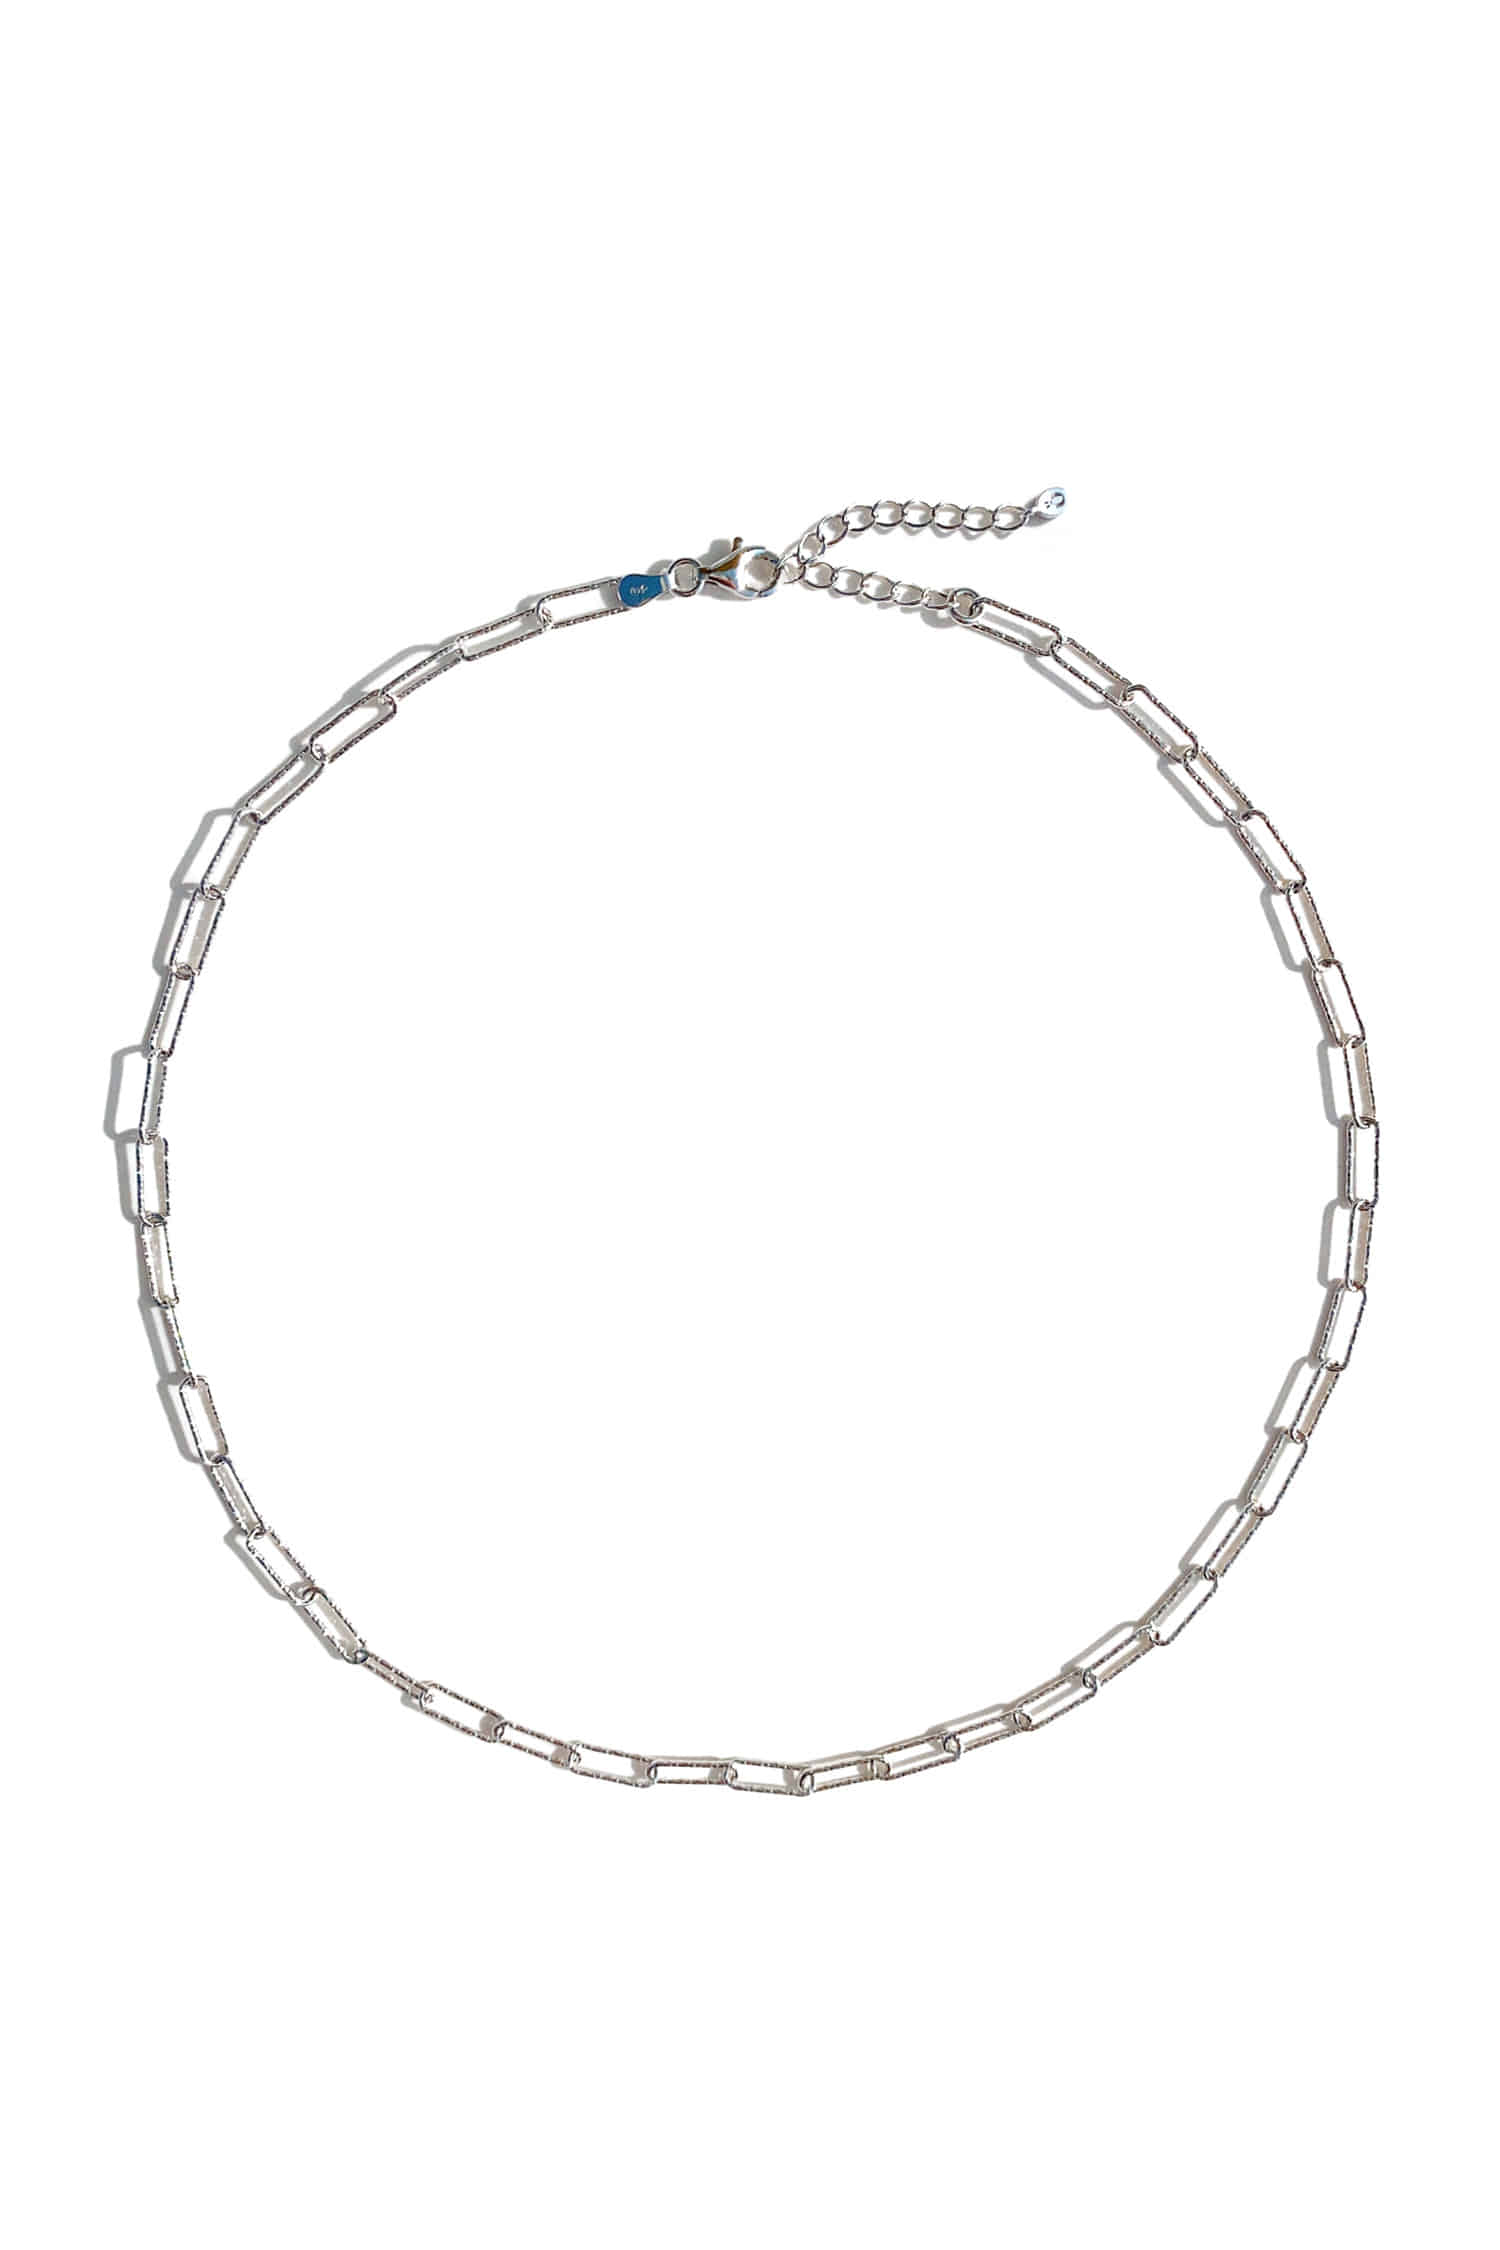 PS002 ITALY CHAIN Silver 925  Necklace